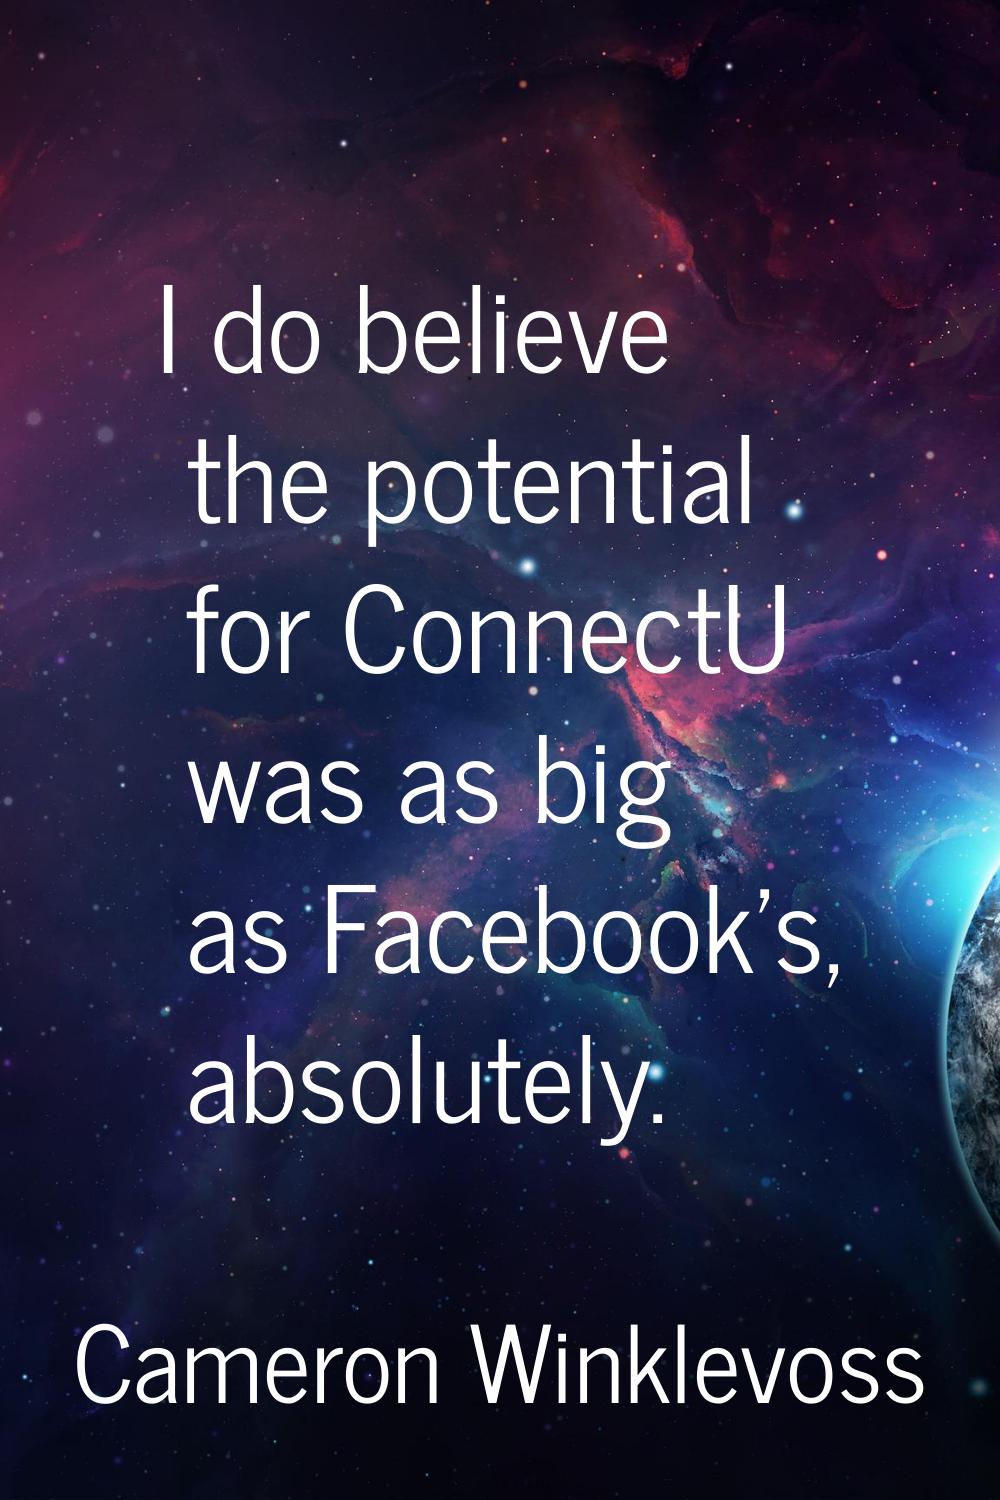 I do believe the potential for ConnectU was as big as Facebook's, absolutely.